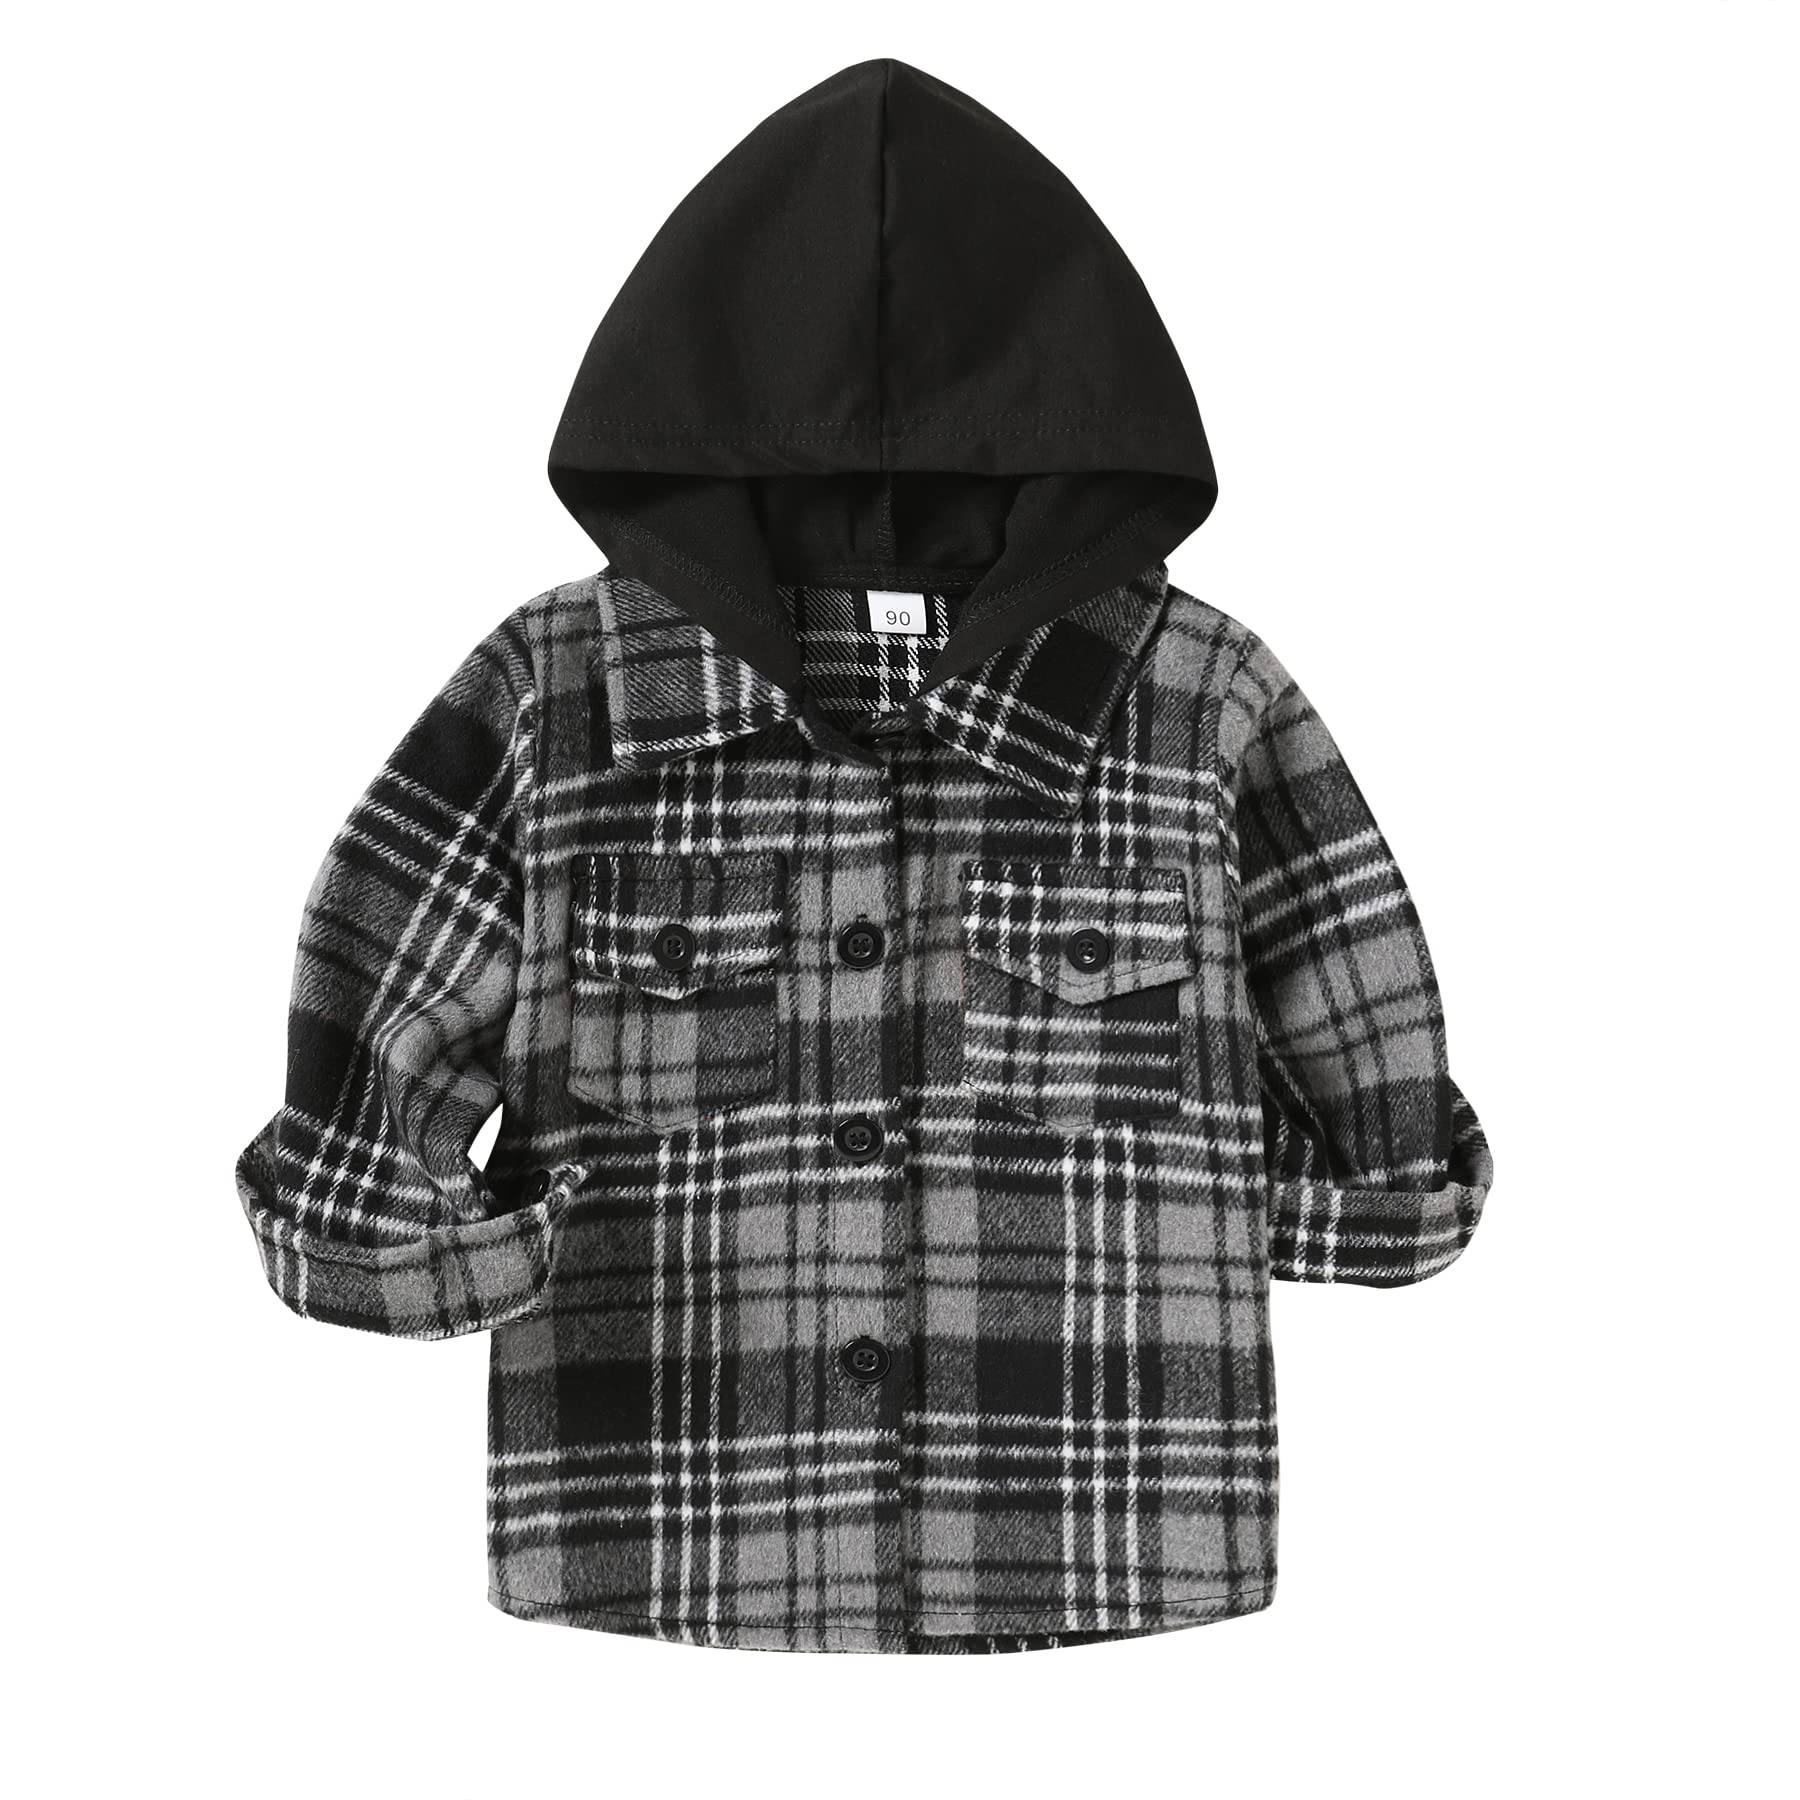 Younger Star Toddler Kidsbaby Boys Hooded Plaid Shirt Classical Shirt Hooded Jacket Fall Winter Clothes (Dark Gray 1, 4-5 Years)